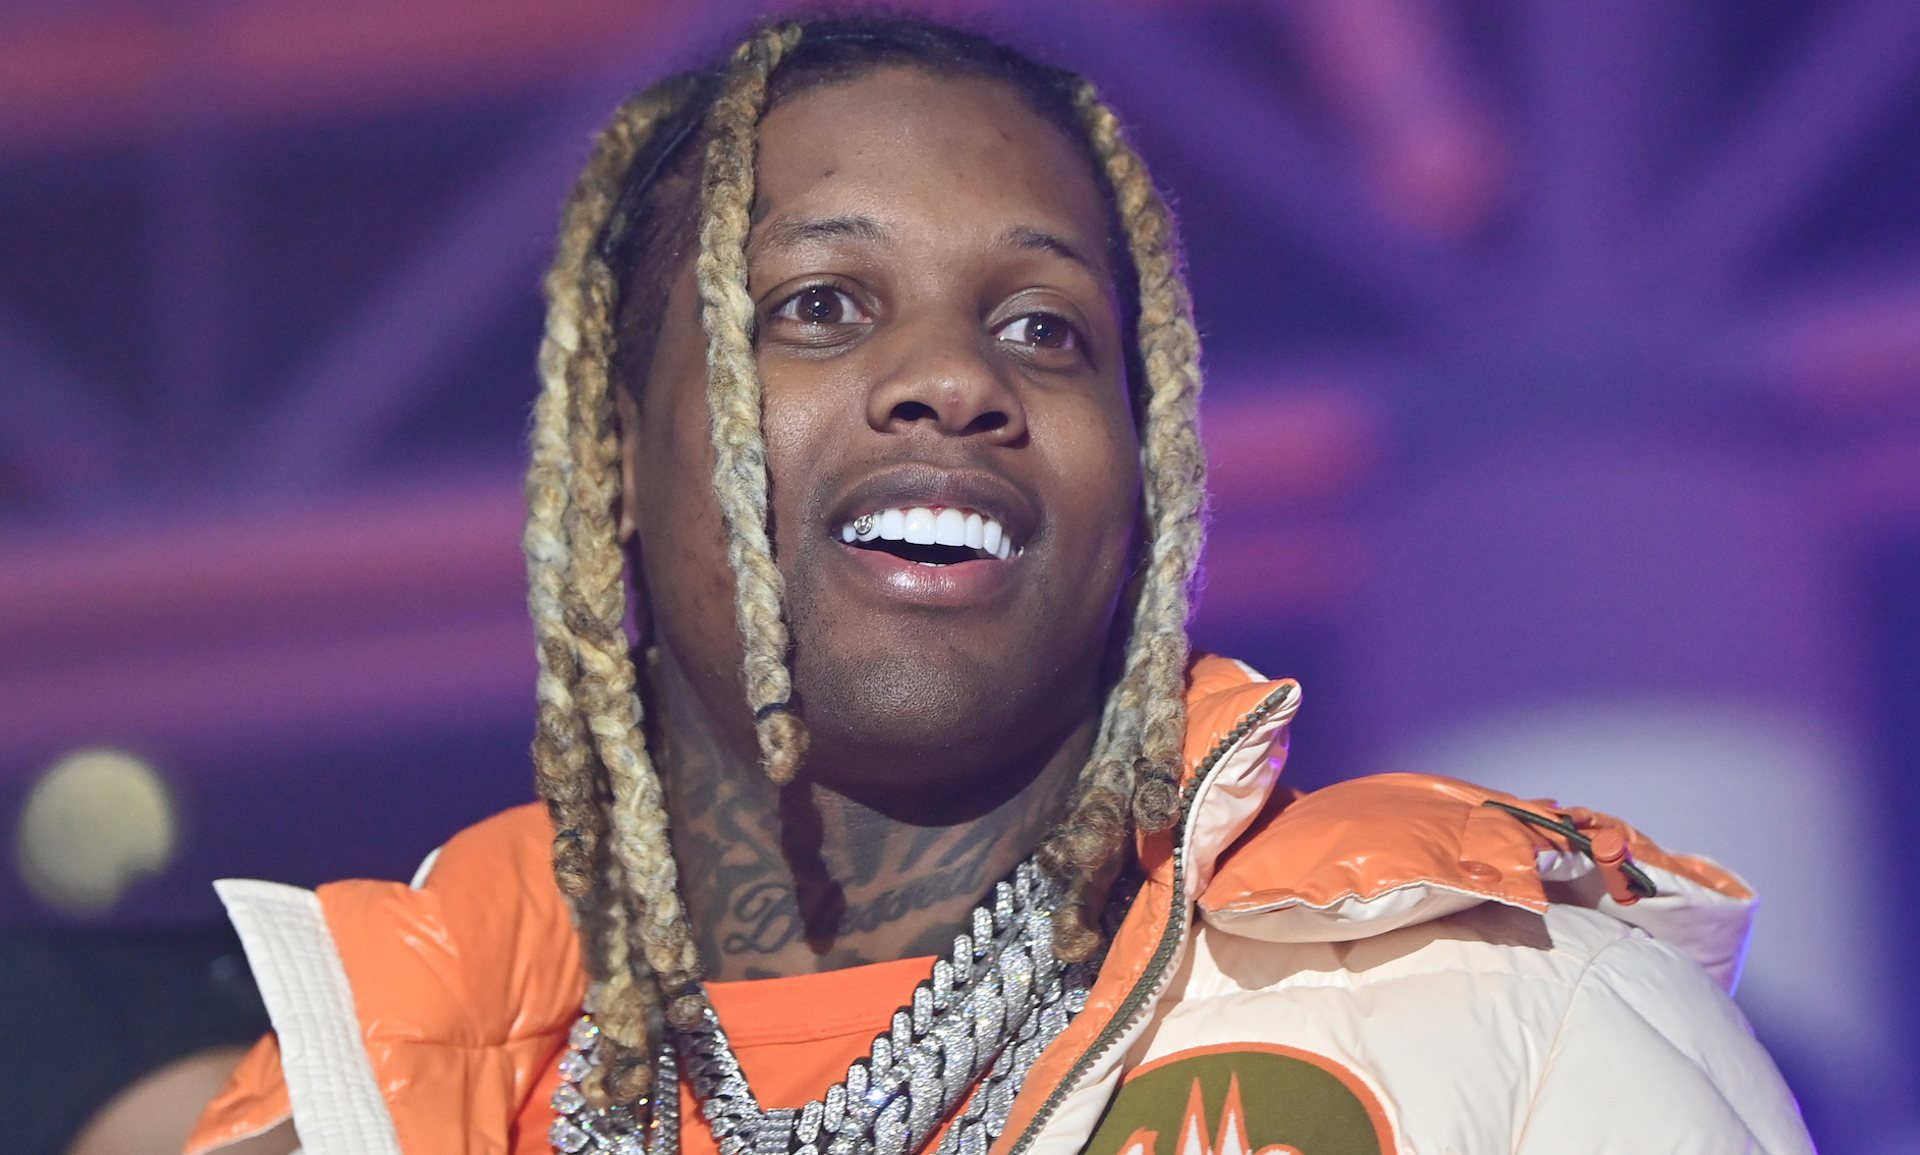 Lil Durk’s Neighborhood Heroes Organization Delivers 29,000 Bottles of Hand Sanitizer to Illinois Prisons